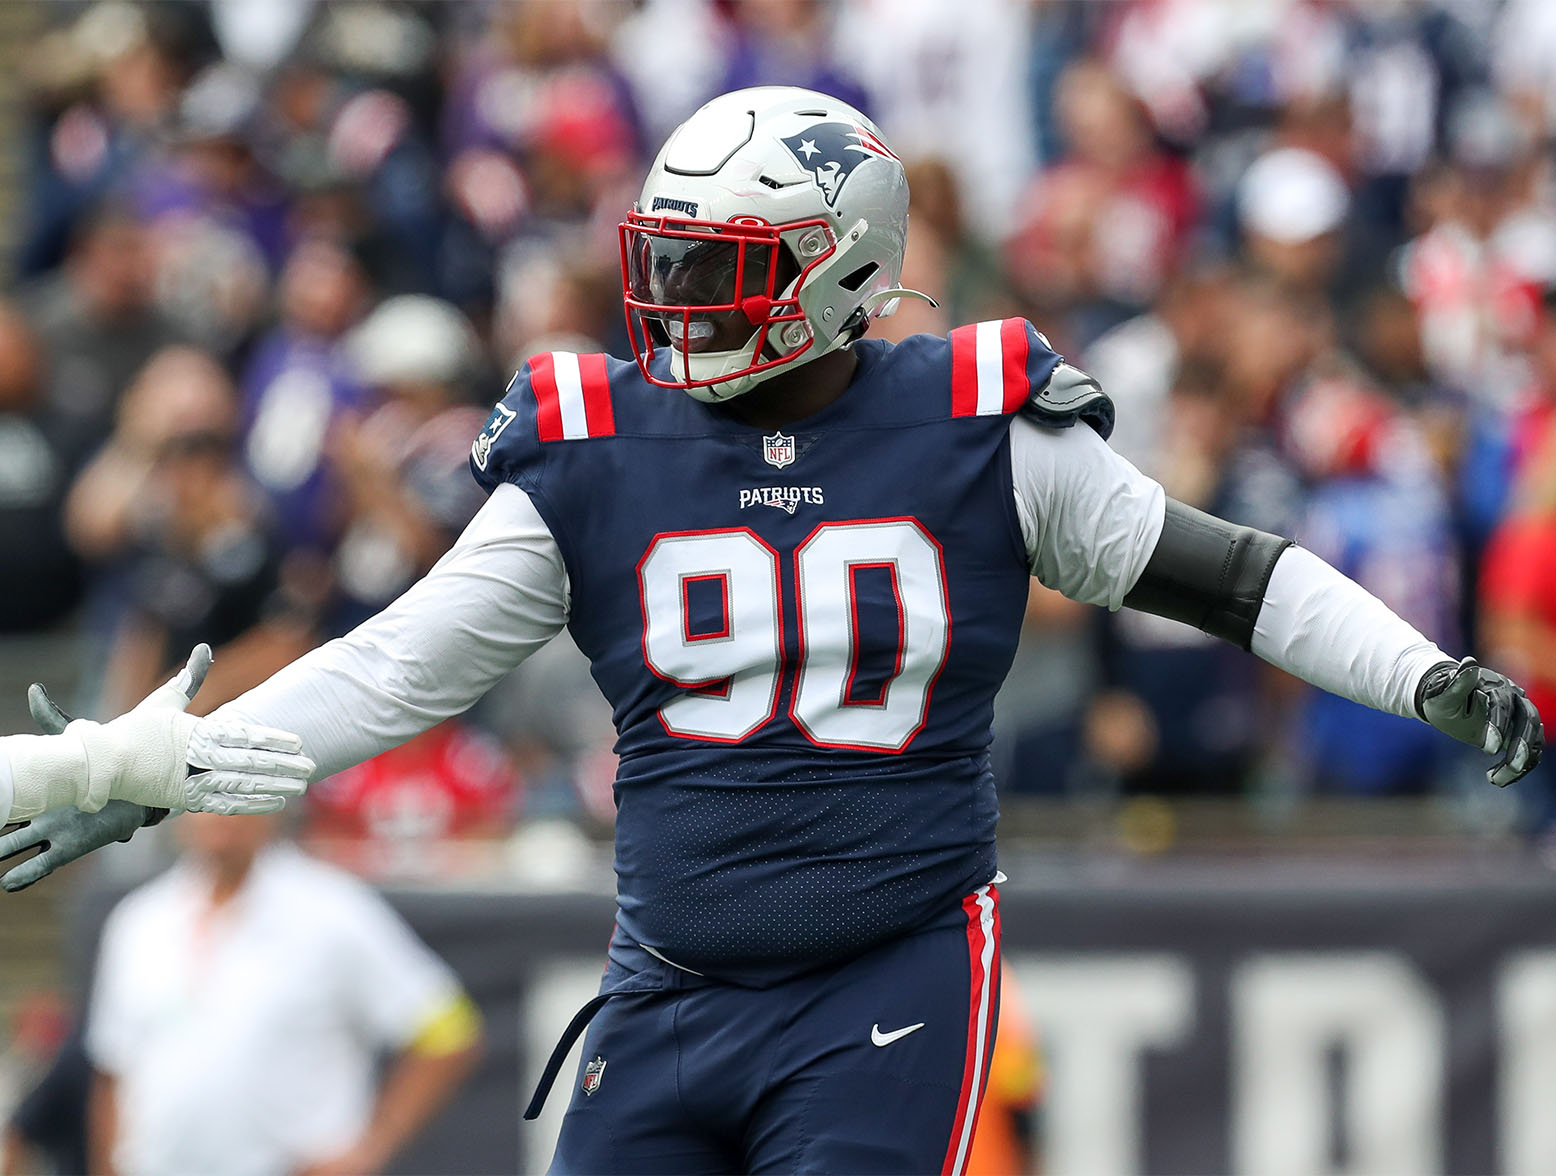 Sep 25, 2022; Foxborough, Massachusetts, USA; New England Patriots defensive tackle Christian Barmore (90) reacts during the first half against the Baltimore Ravens at Gillette Stadium. Mandatory Credit: Paul Rutherford-USA TODAY Sports